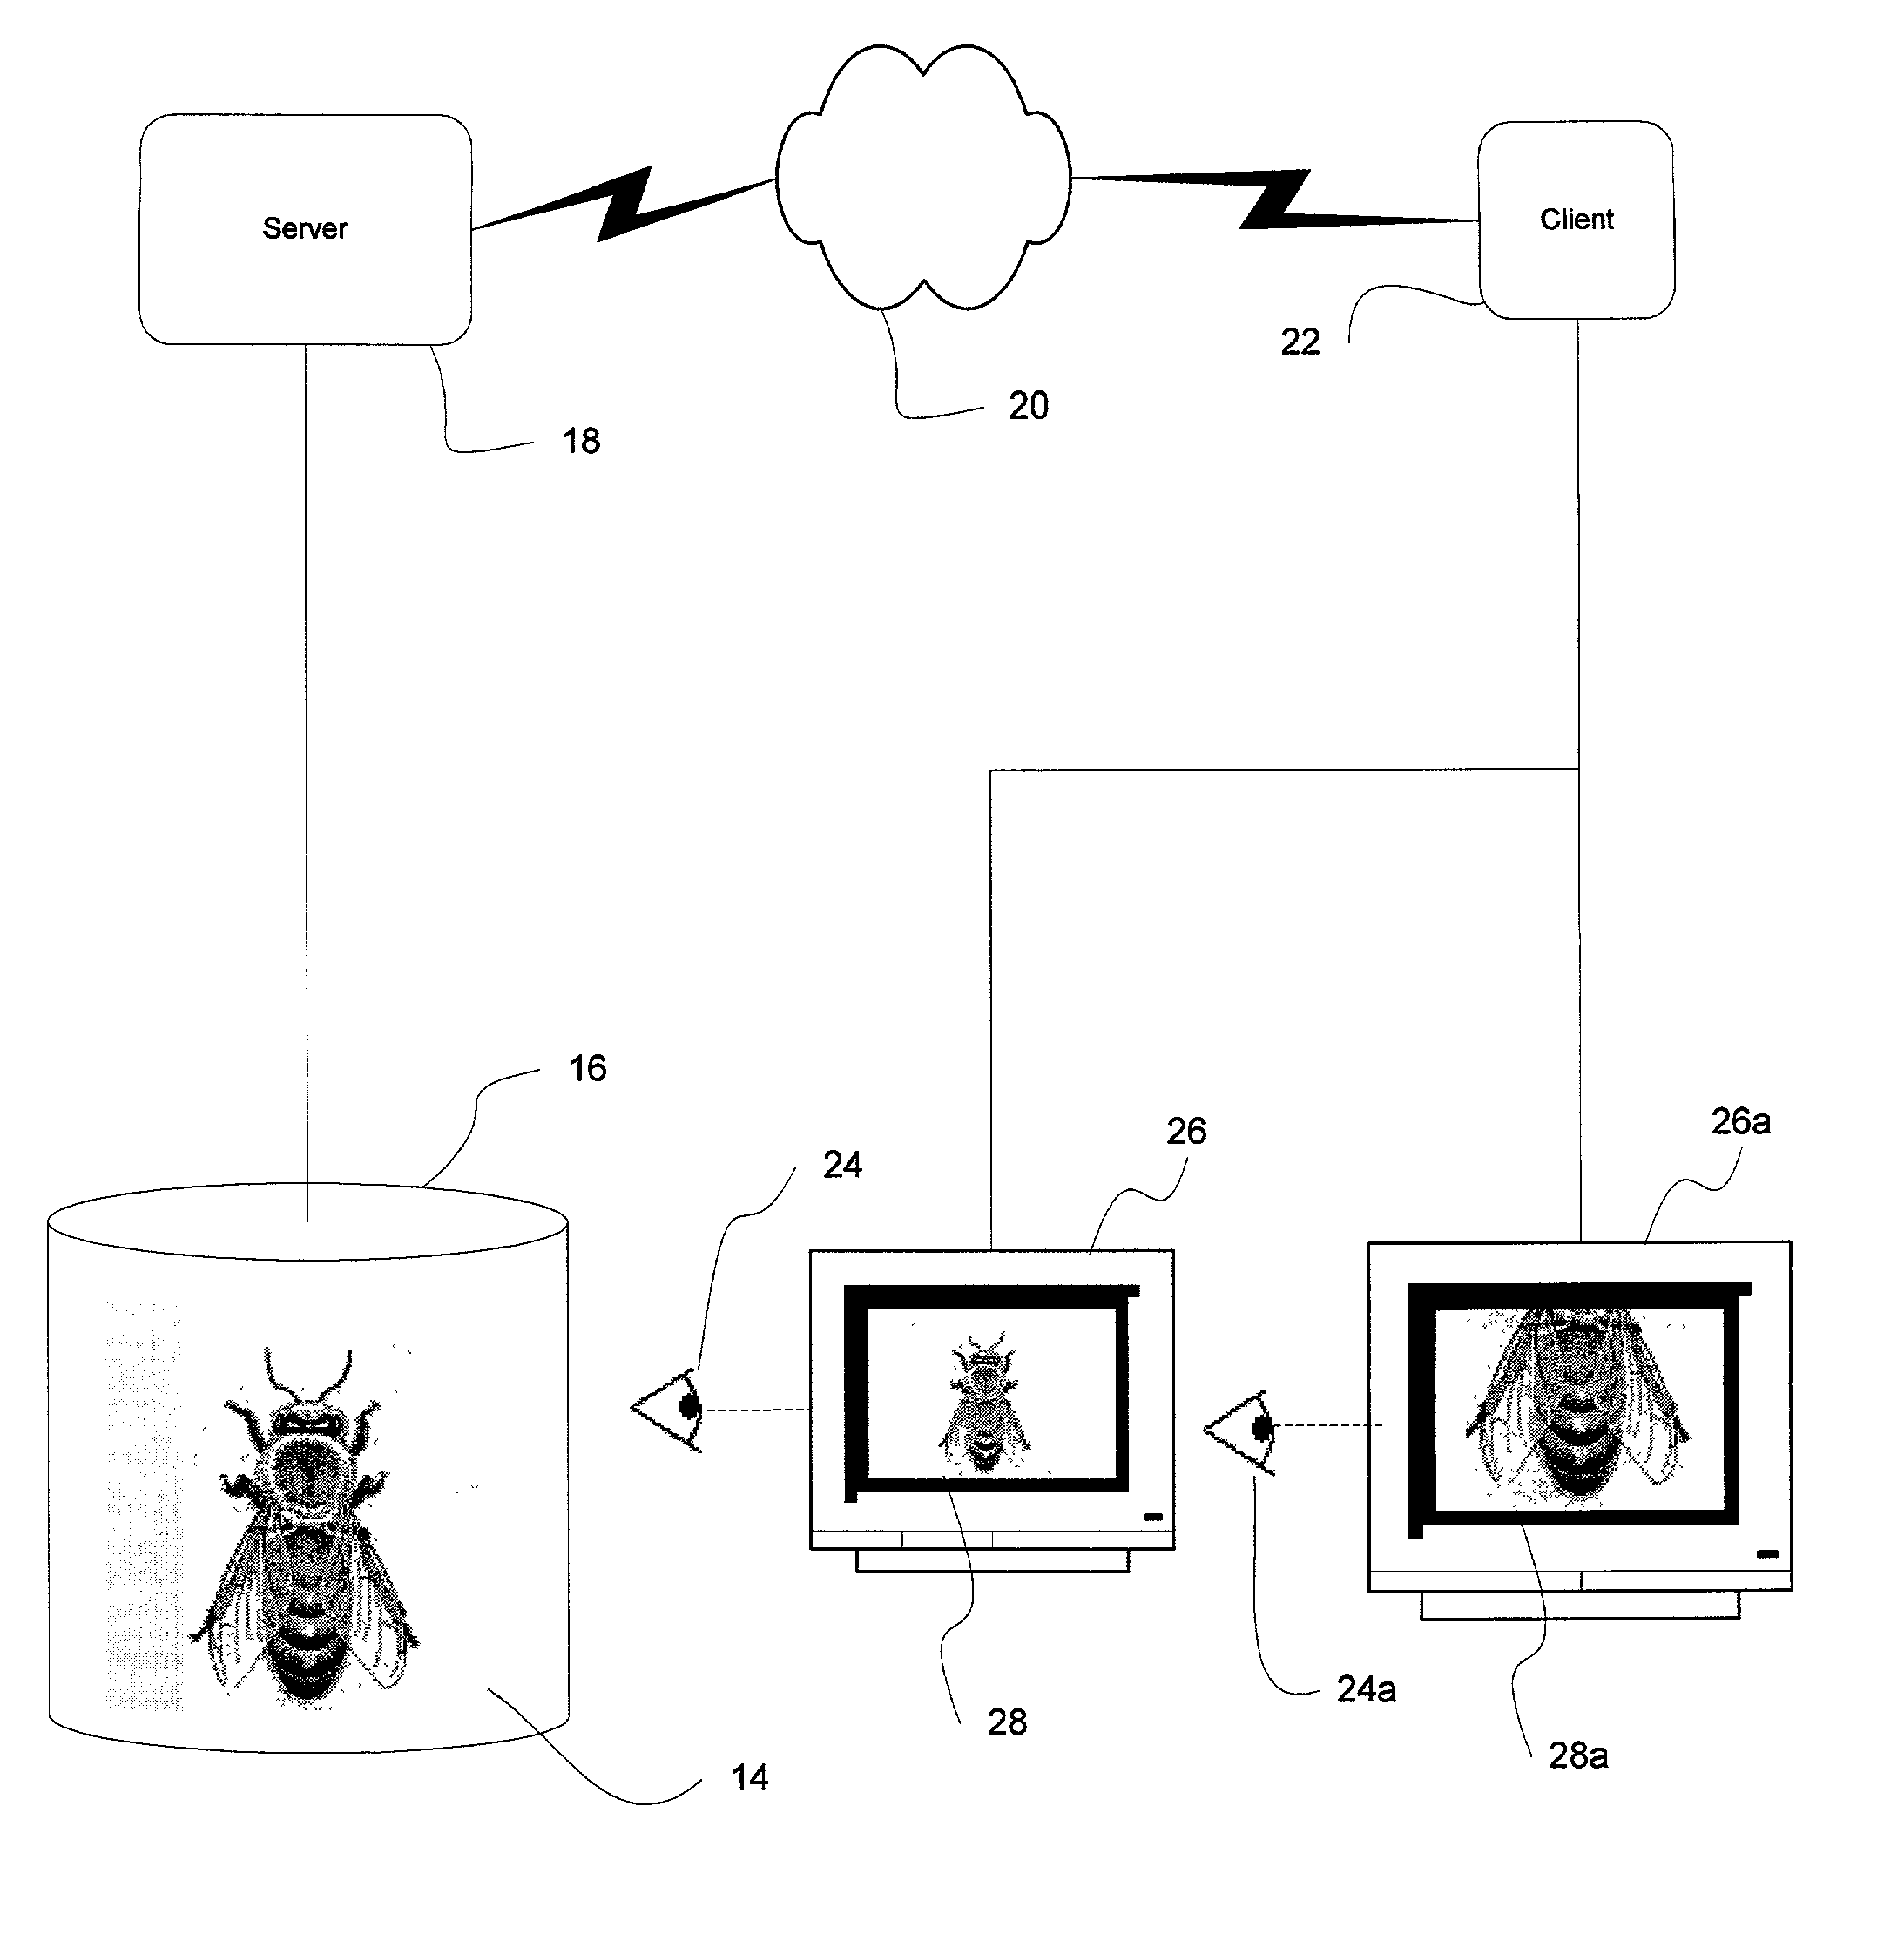 Process and data structure for providing required resolution of data transmitted through a communications link of given bandwidth